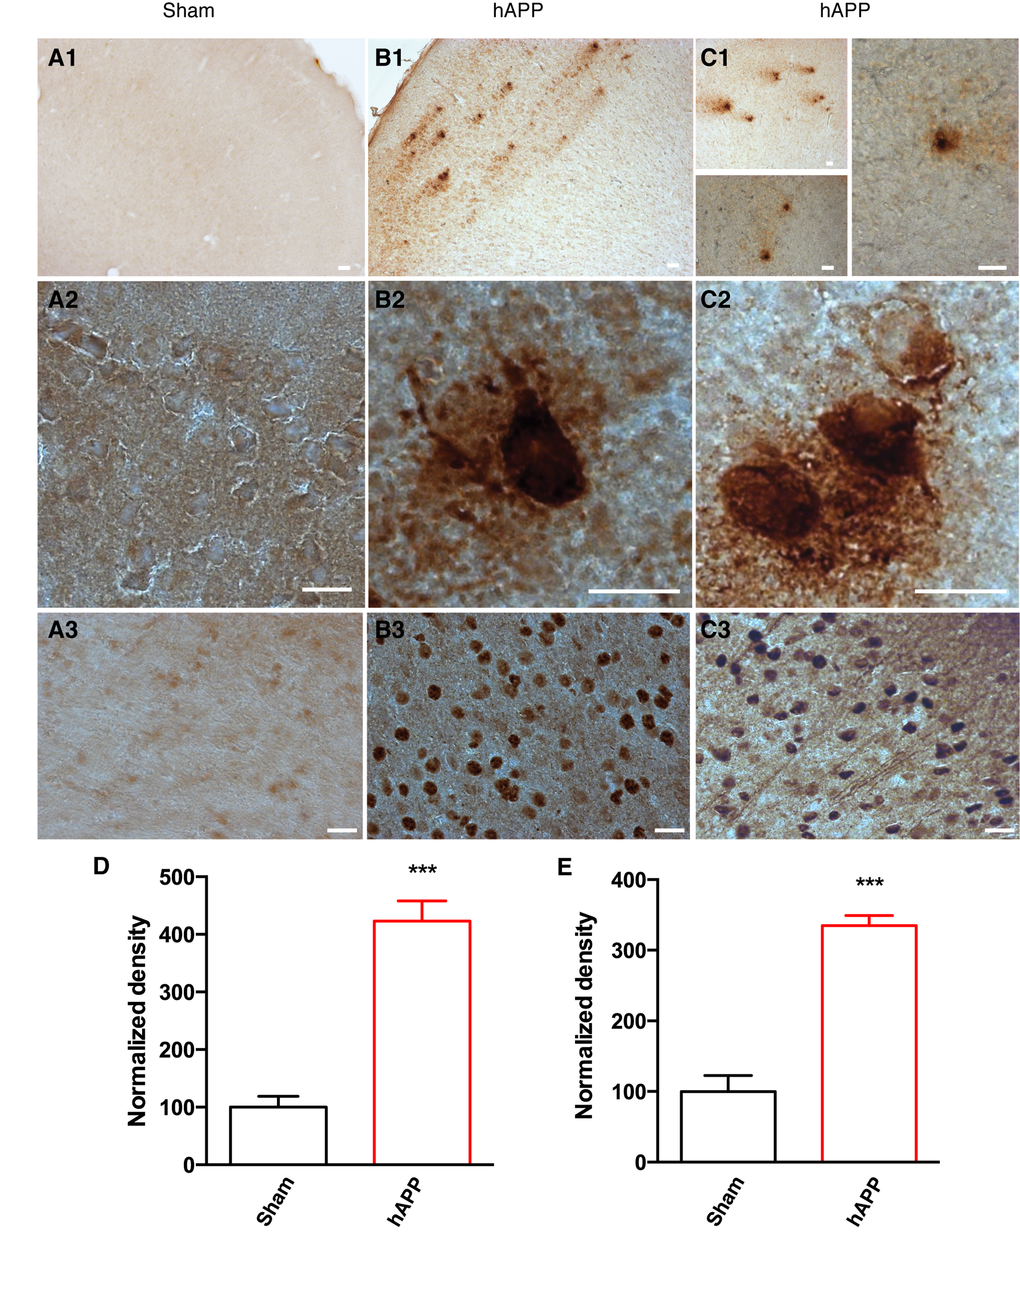 Detection of amyloid plaques and NFTs in the PFC of AAV-hAPP-SLA injected mice at 12 mpi. (A) Sham mouse brains injected with a control AAV and (B), (C) AAV-hAPP-SLA injected mice stained with the 4G8 antibody (1, 2) and AT100 antibody (phospho-tau at Ser212 and Thr214) (3). Scale bars = 20 µm. Quantification of 4G8 optical density (D) and AT100 densities (E) and normalized to values obtained in sham operated mice. The error bar is ± SEM. (Student’s test, P 